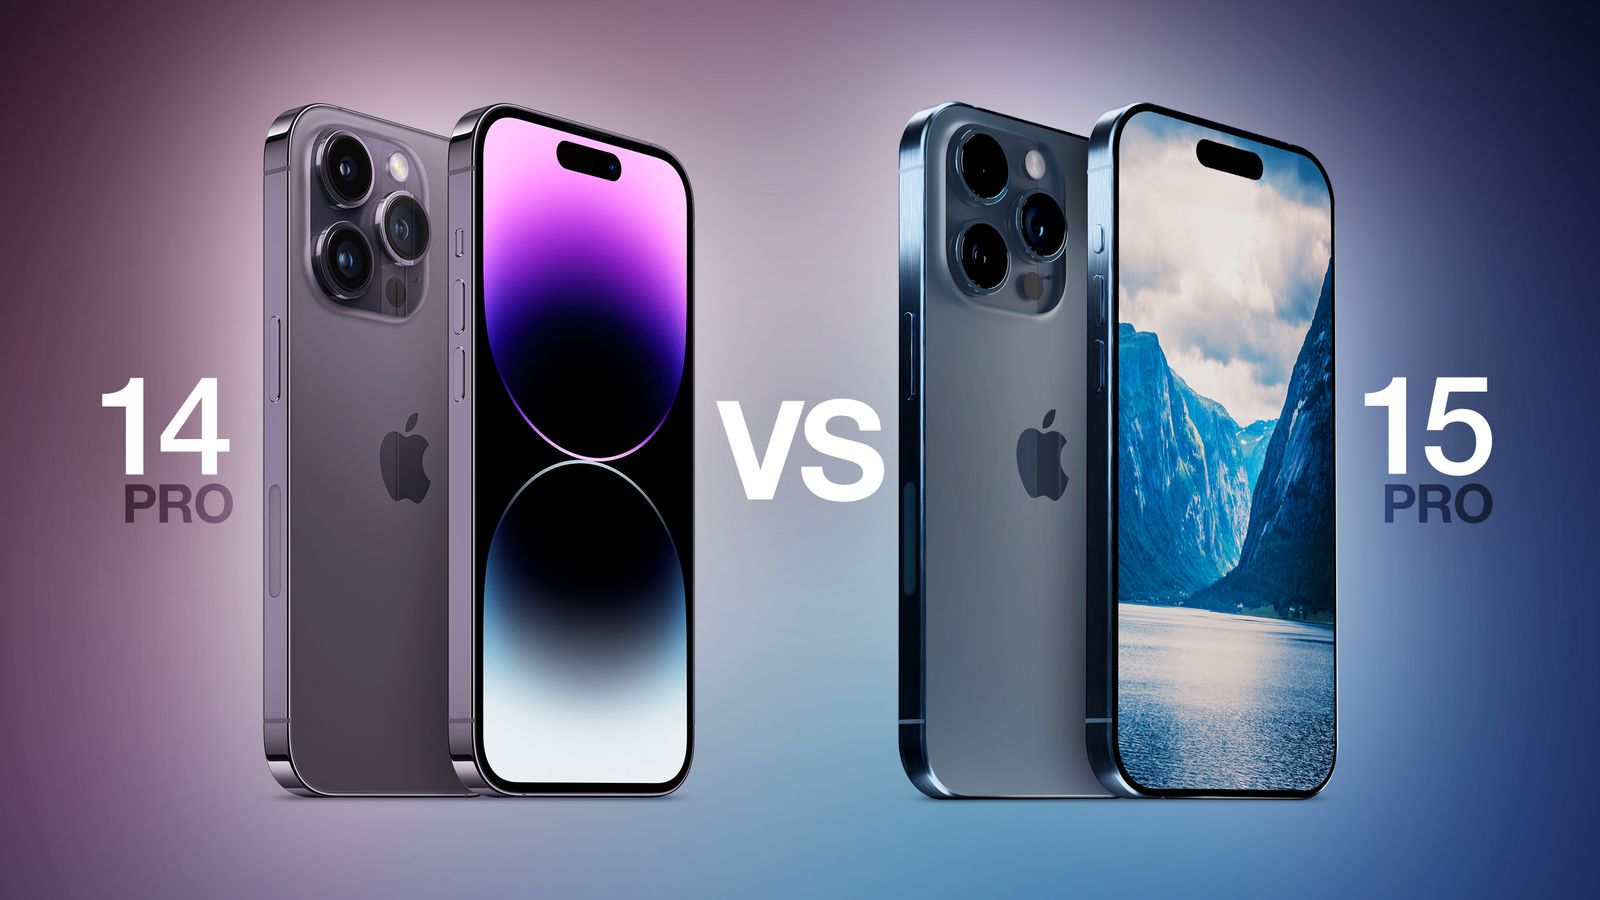 iPhone 15 vs iPhone 14 comparison: Which iPhone to buy?